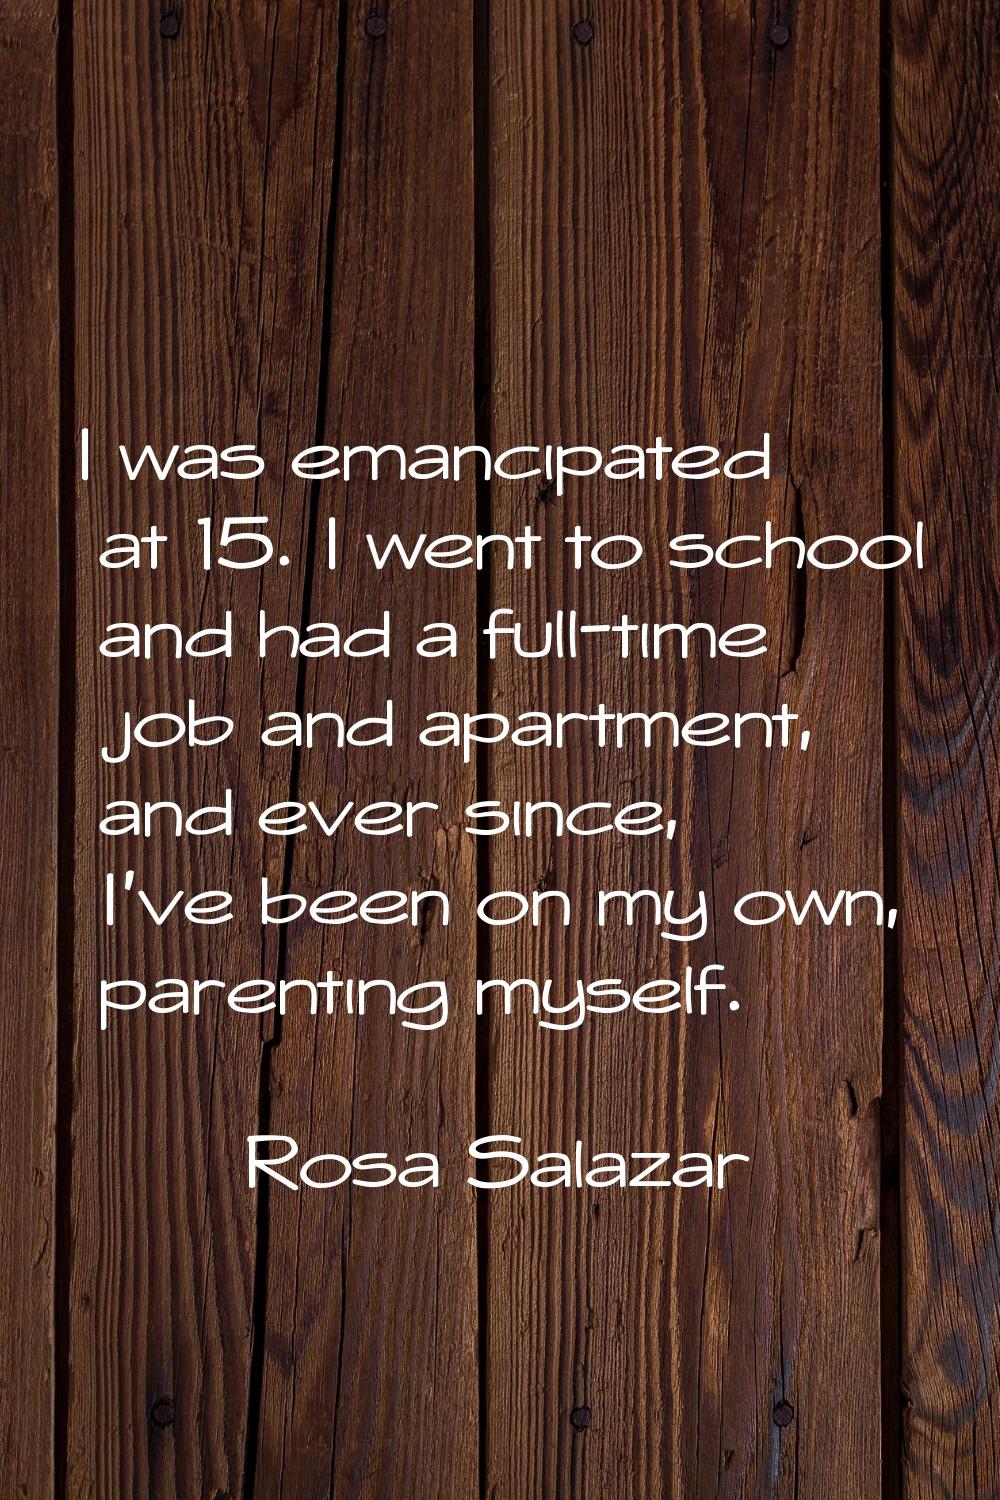 I was emancipated at 15. I went to school and had a full-time job and apartment, and ever since, I'